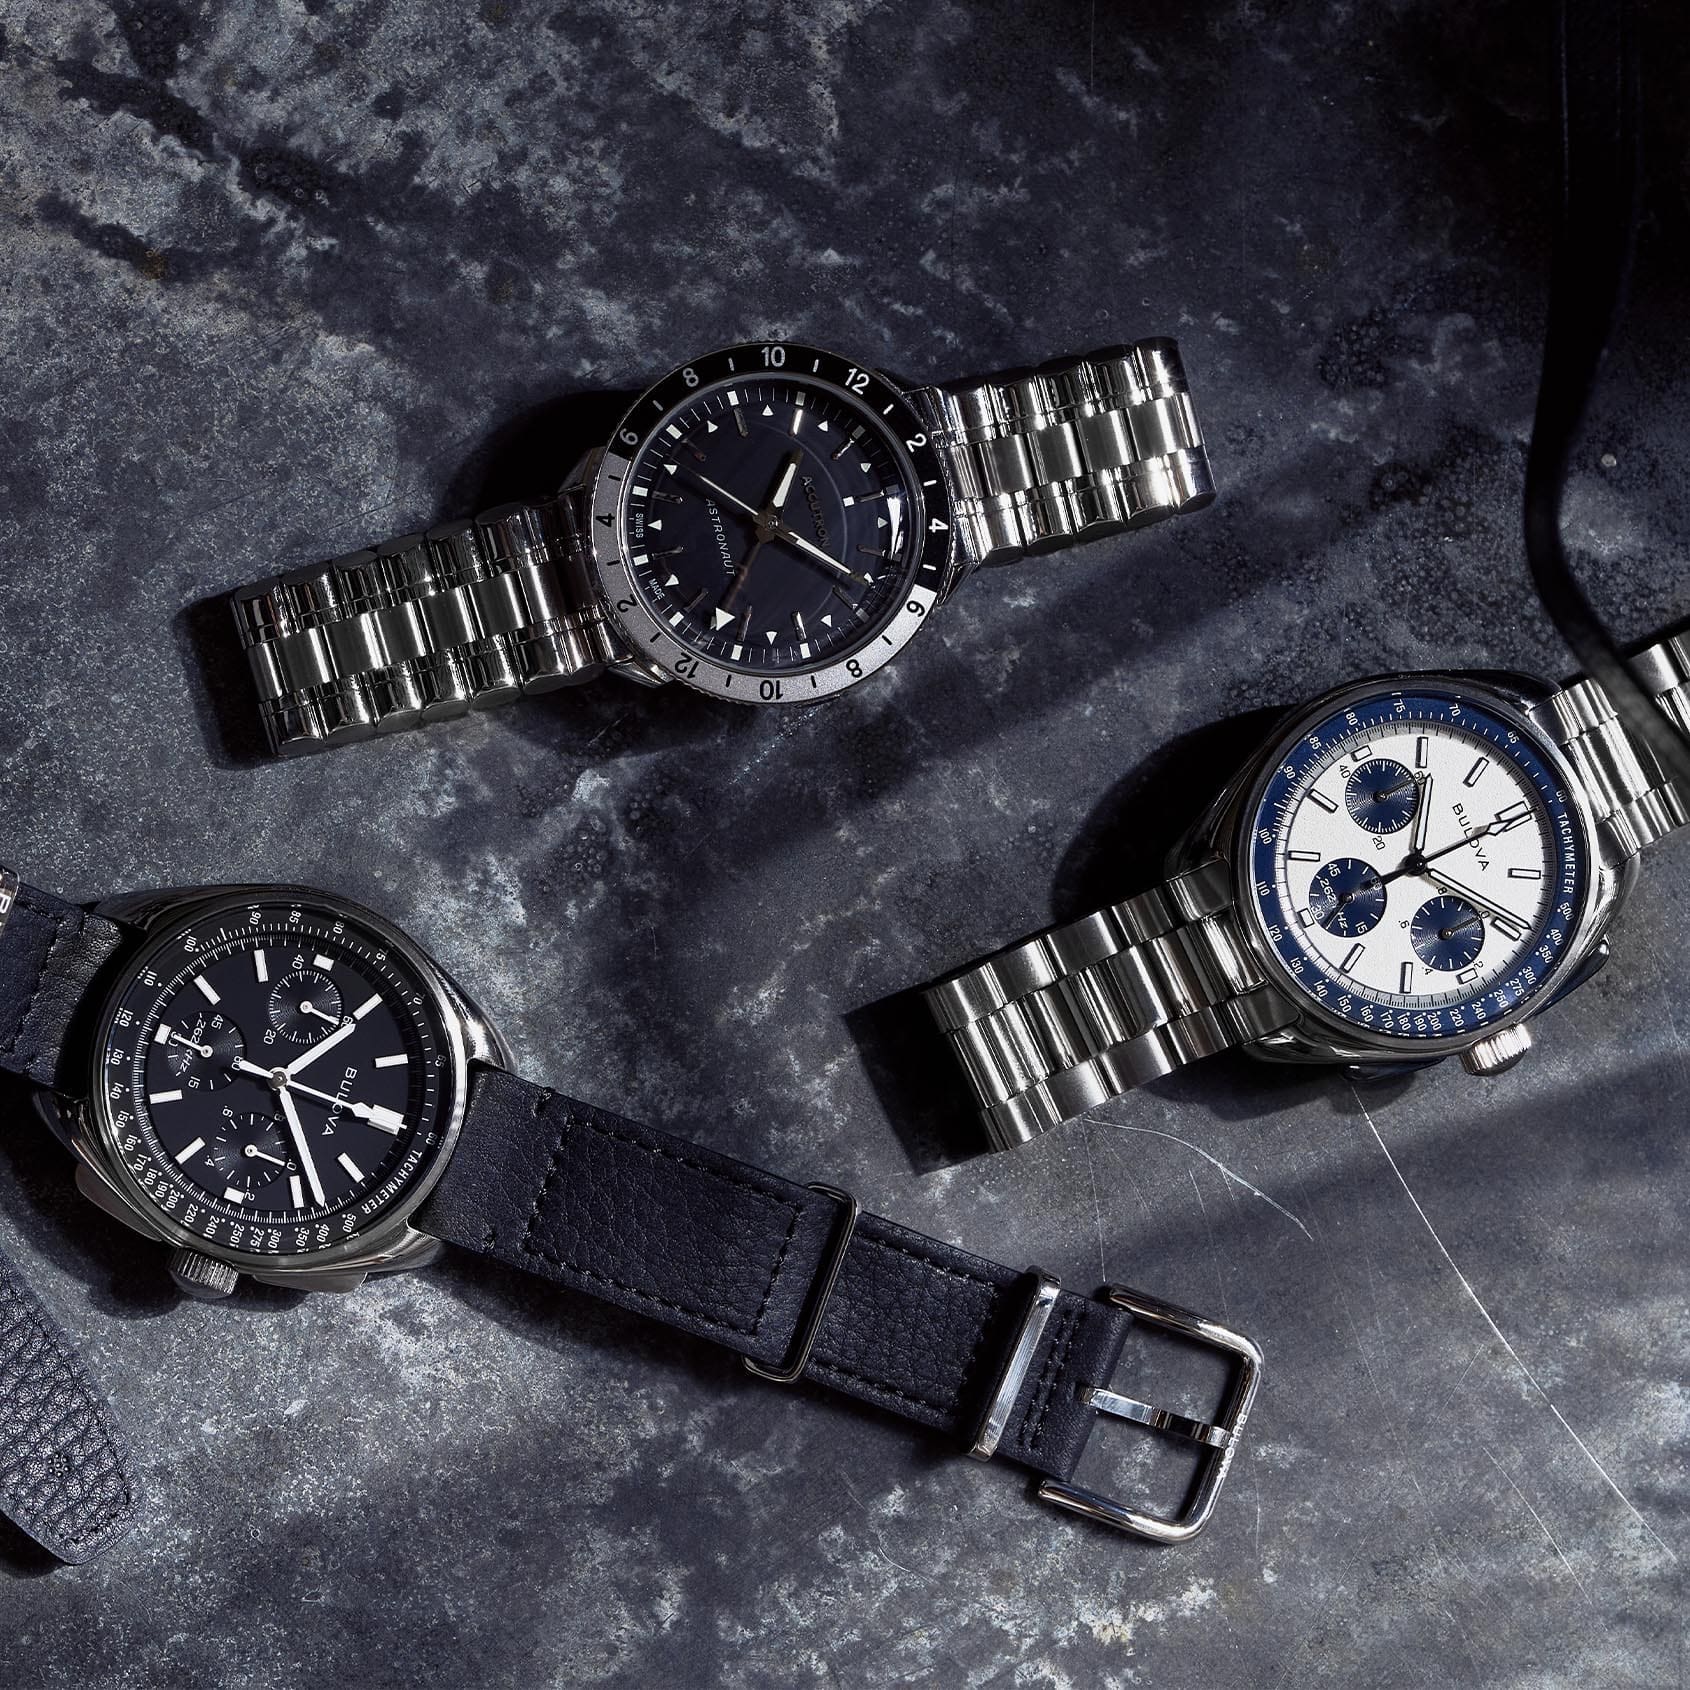 INTRODUCING: The Bulova Lunar Pilot and Accutron Astronaut prepare for lift off once again